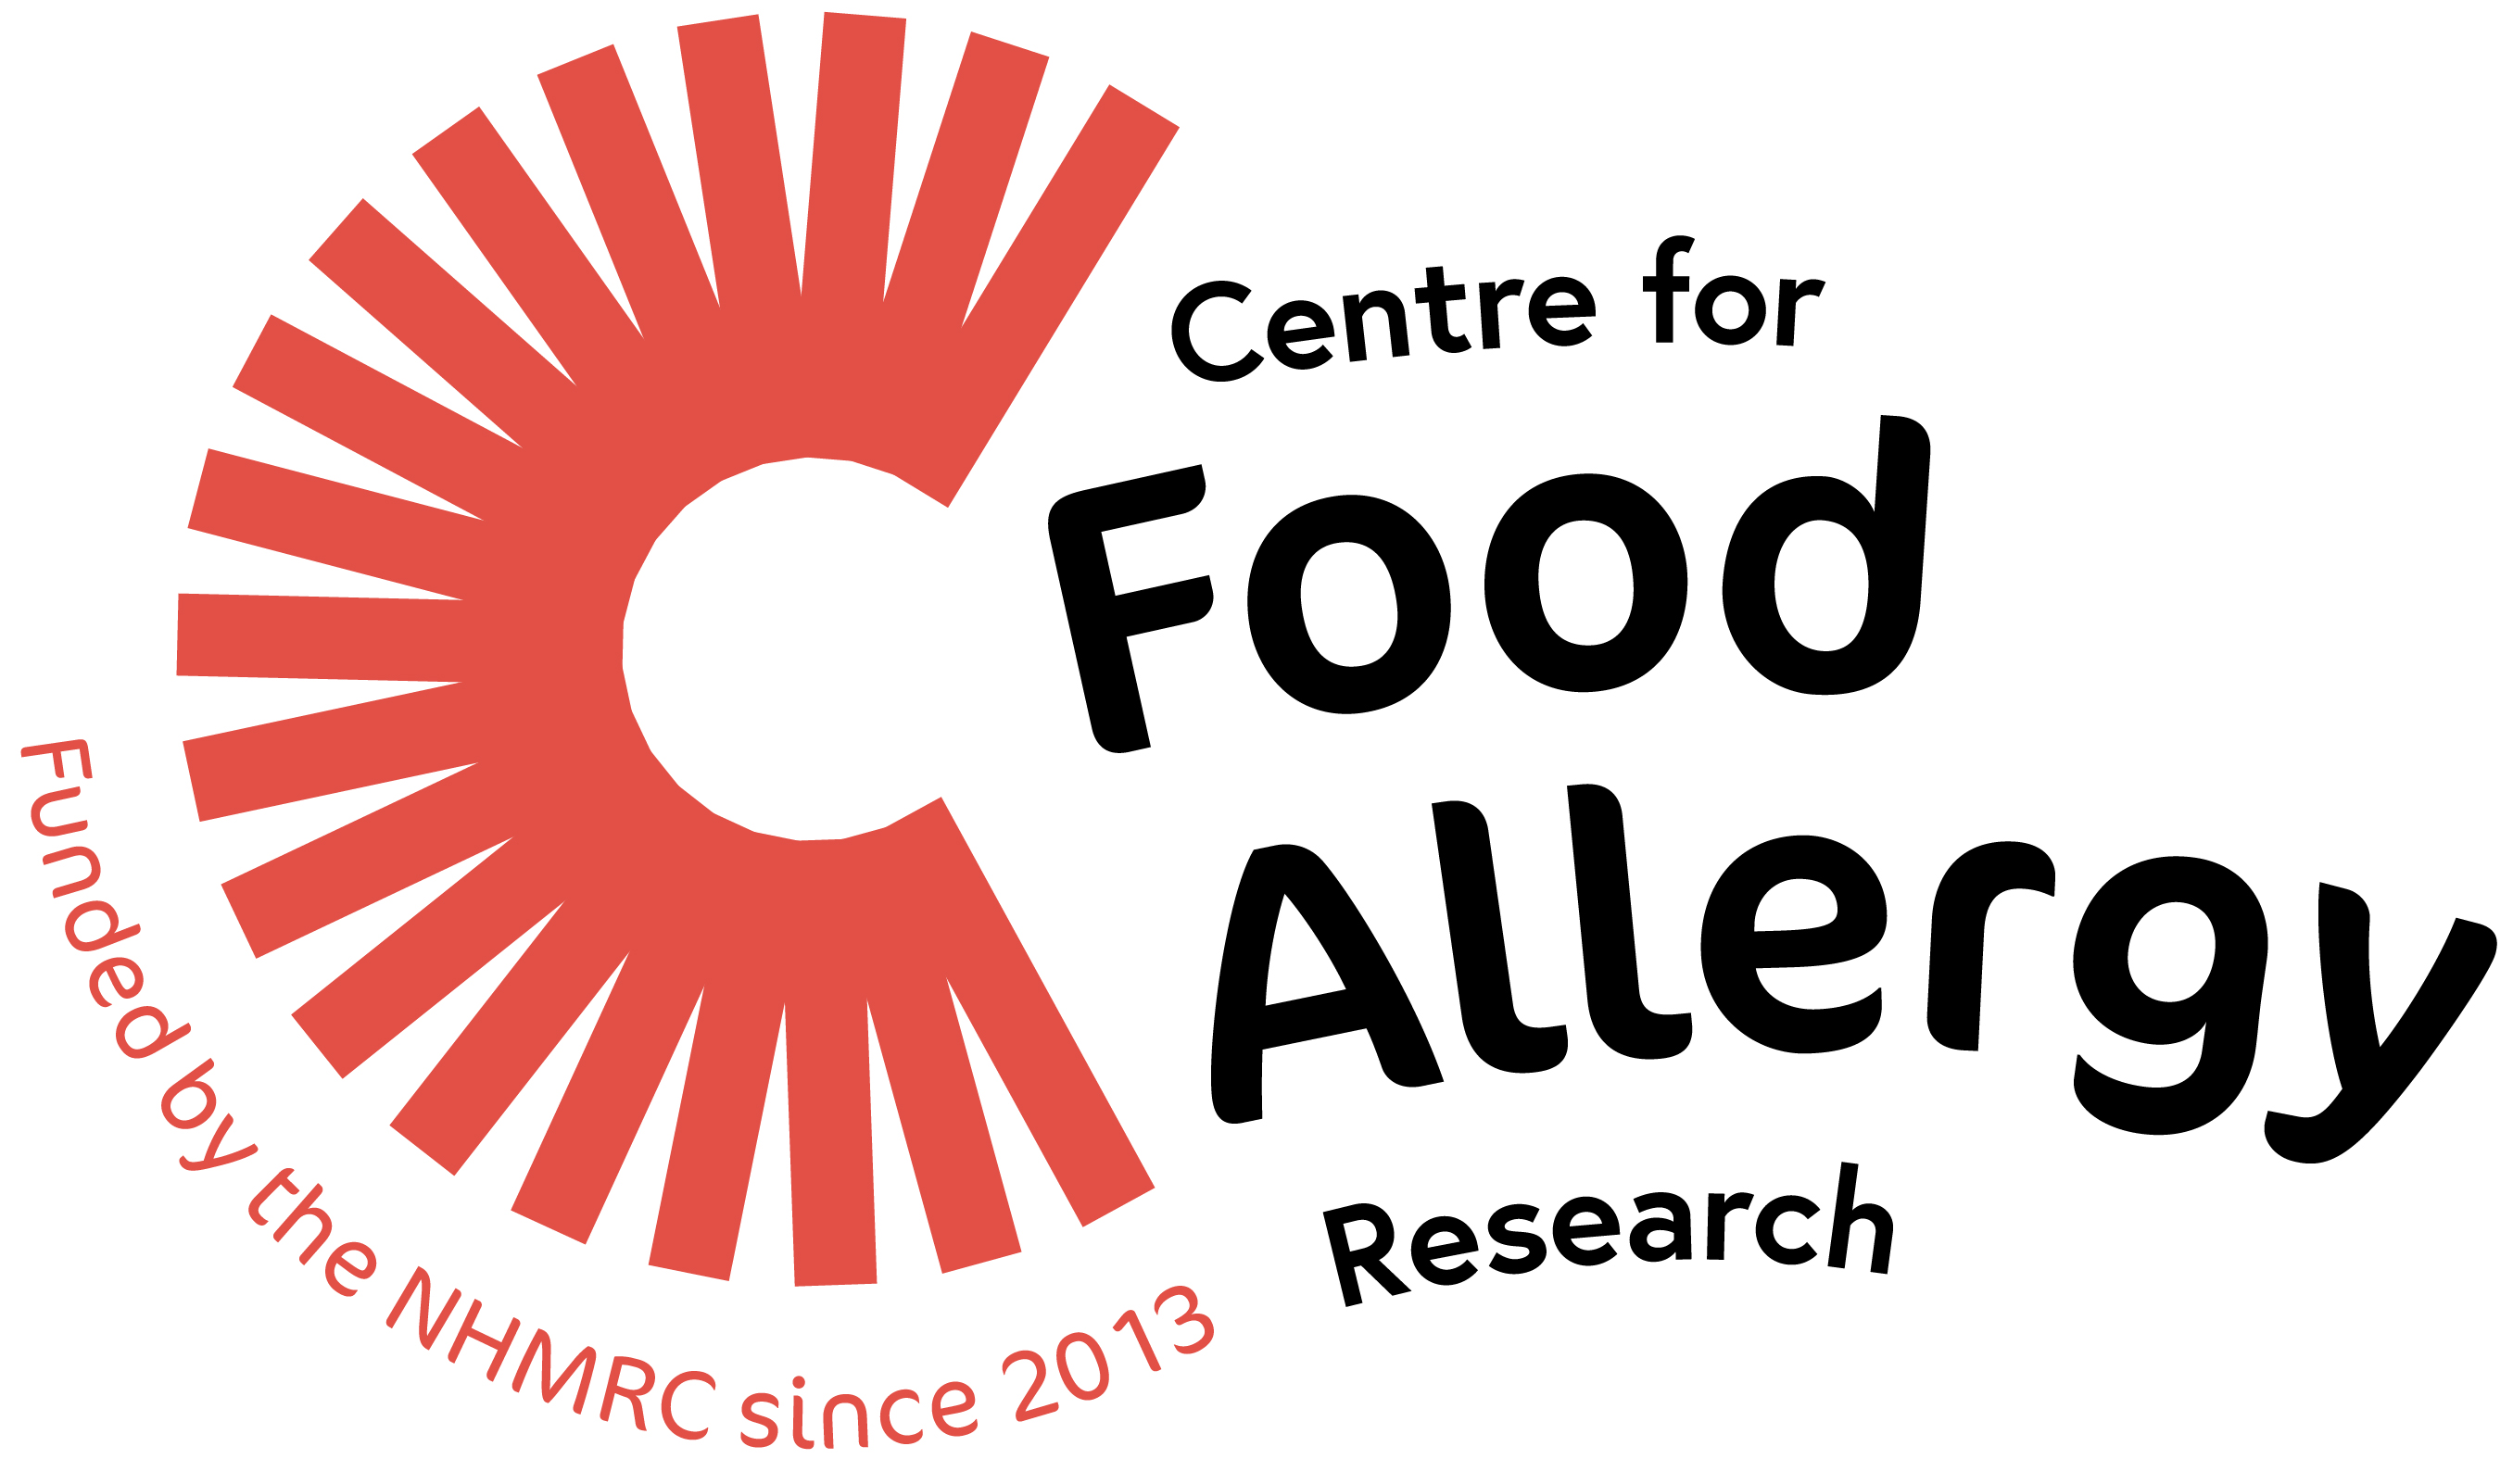 The Centre for Food Allergy Research